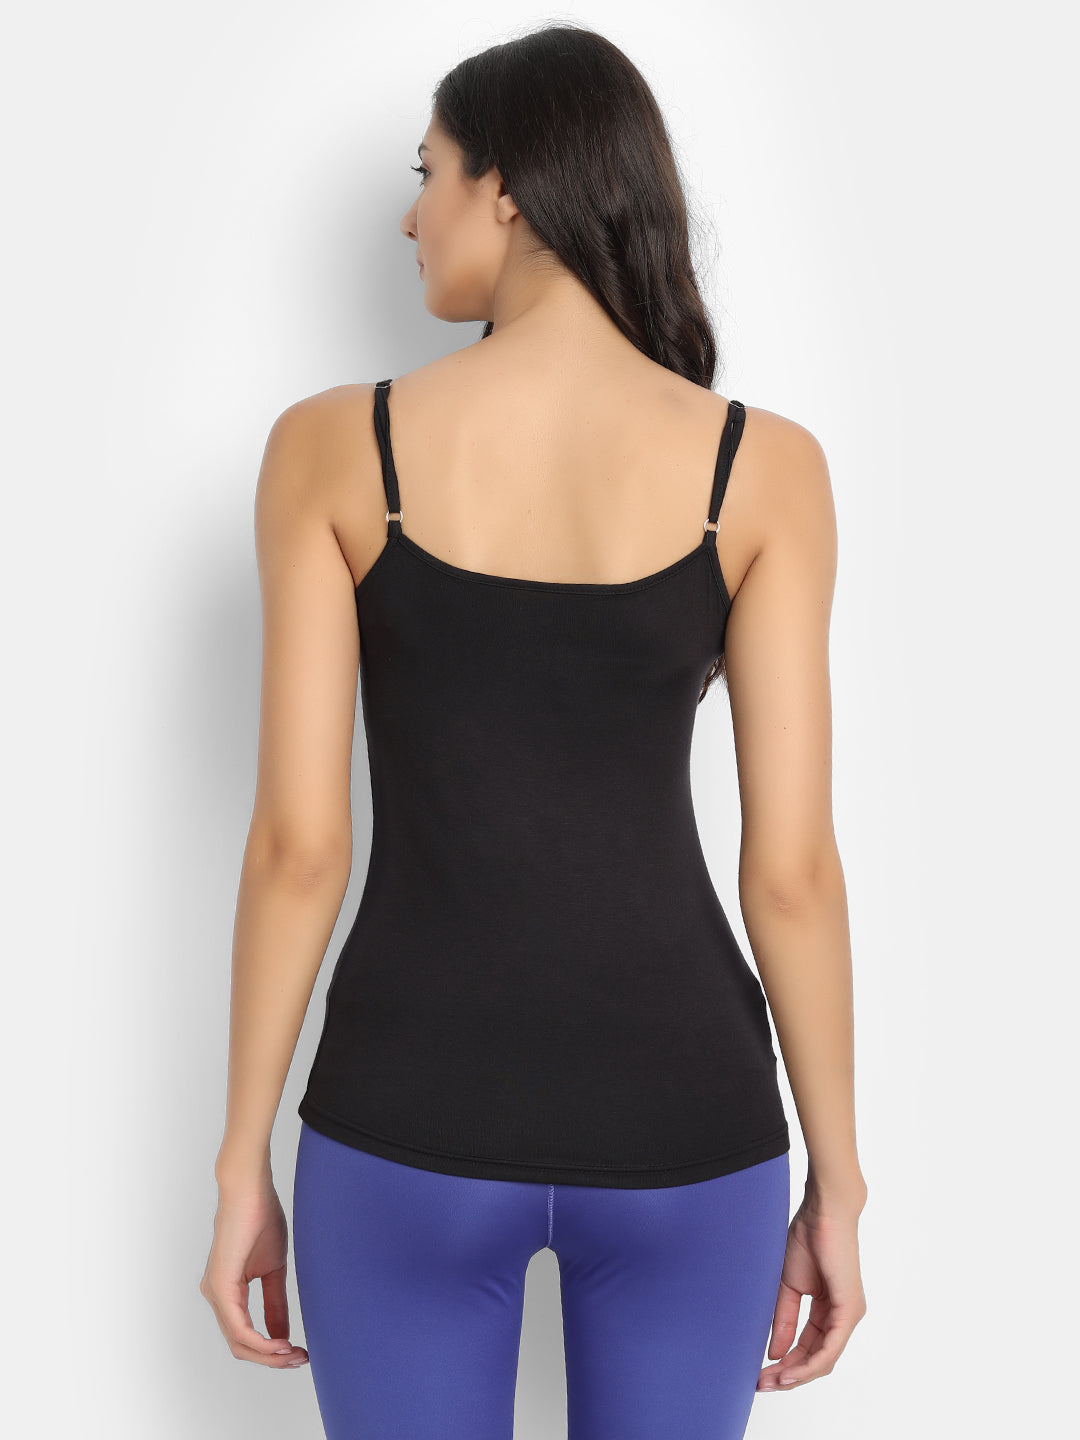 Bamboo fabric black camisole | pack of 2